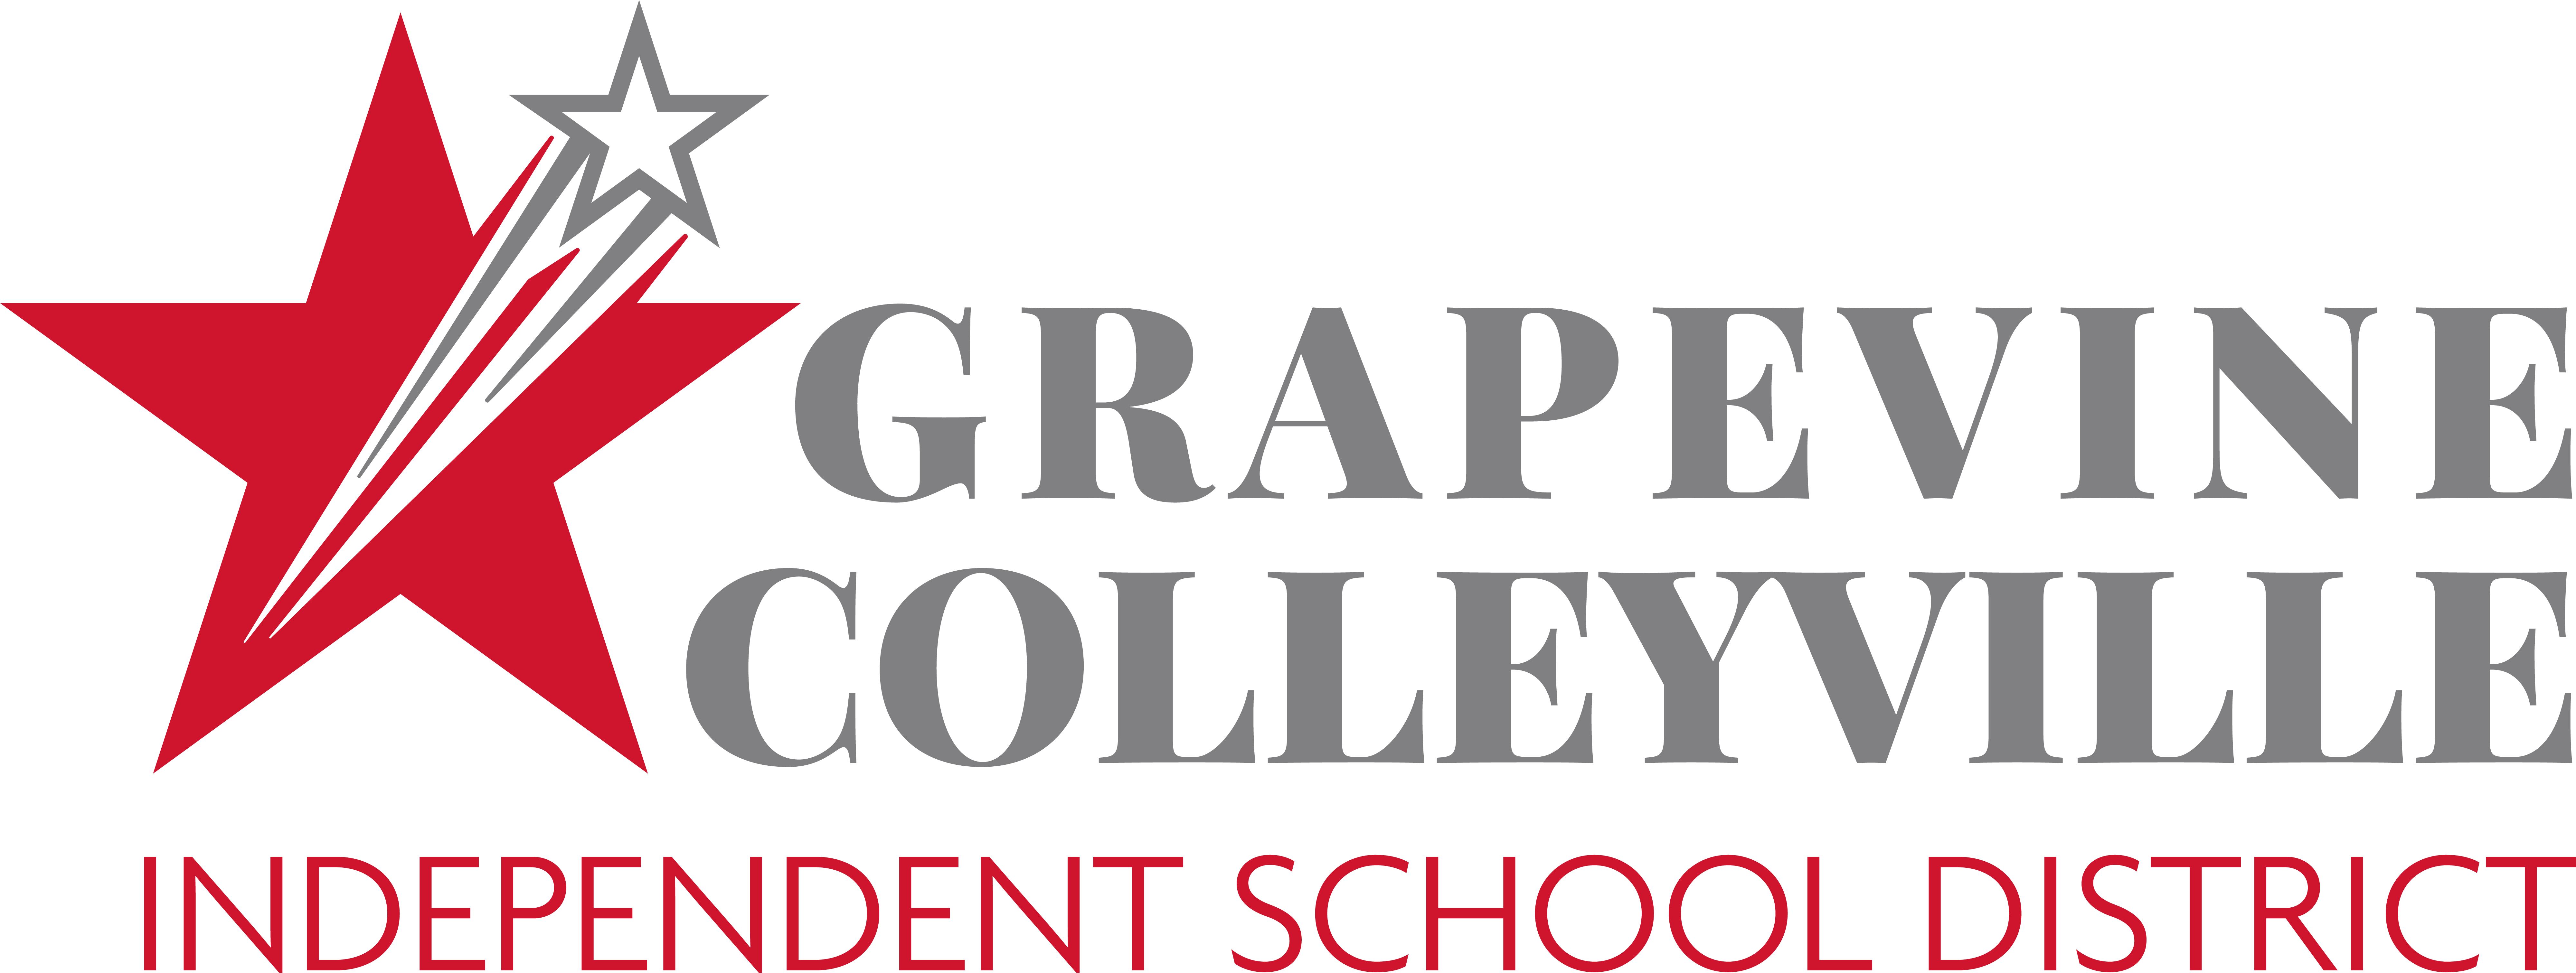 Grapevine-Colleyville ISD Company Logo